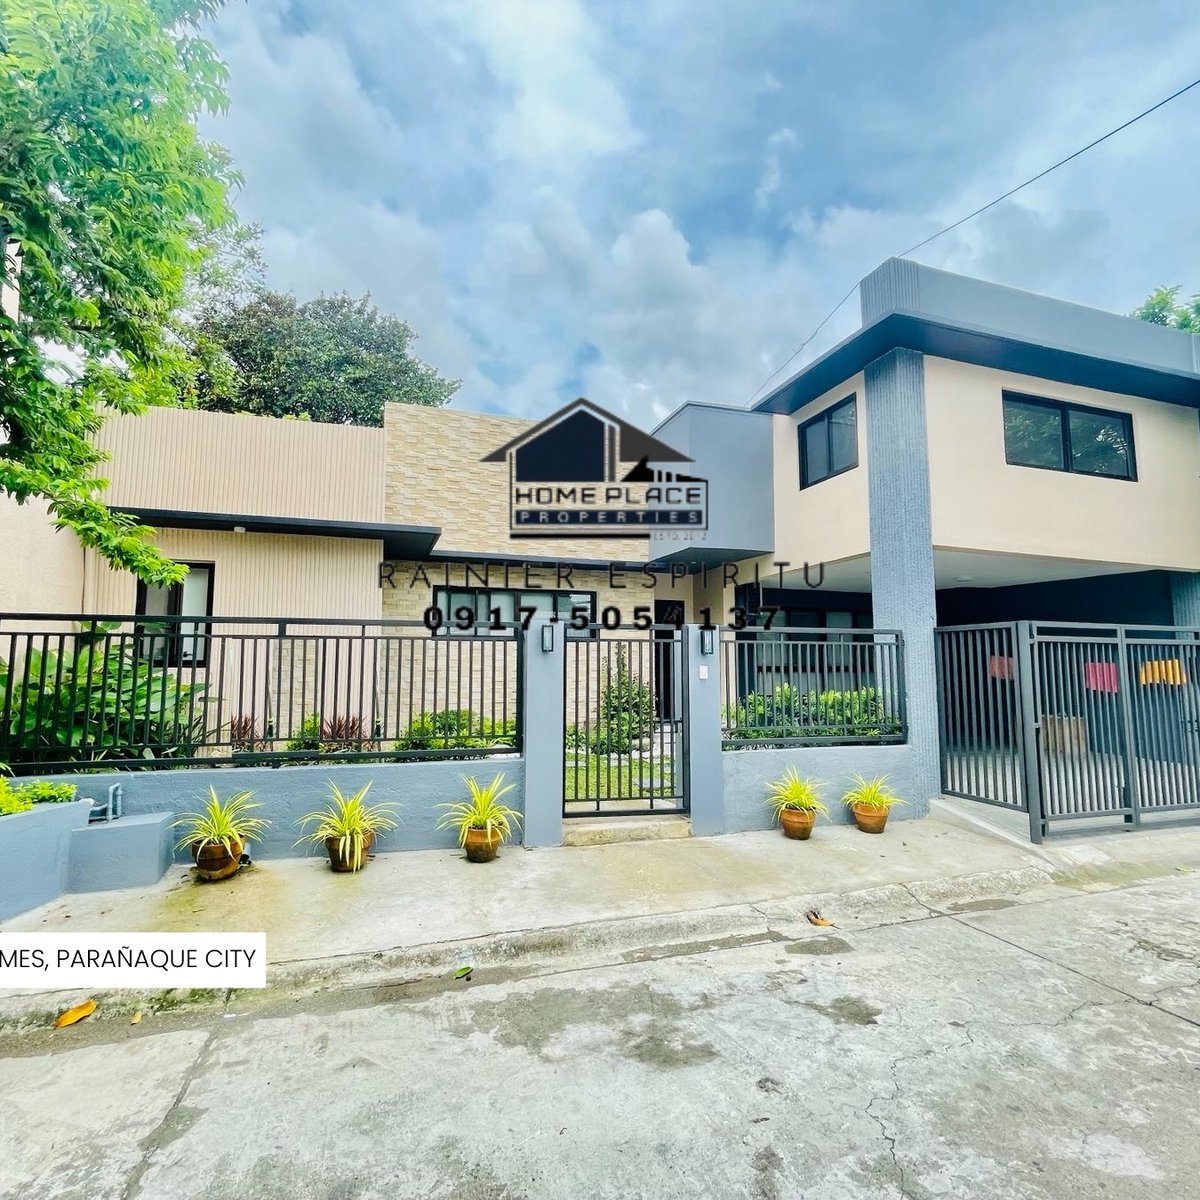 RFO 5-bedroom Single Detached House For Sale in Paranaque Metro Manila